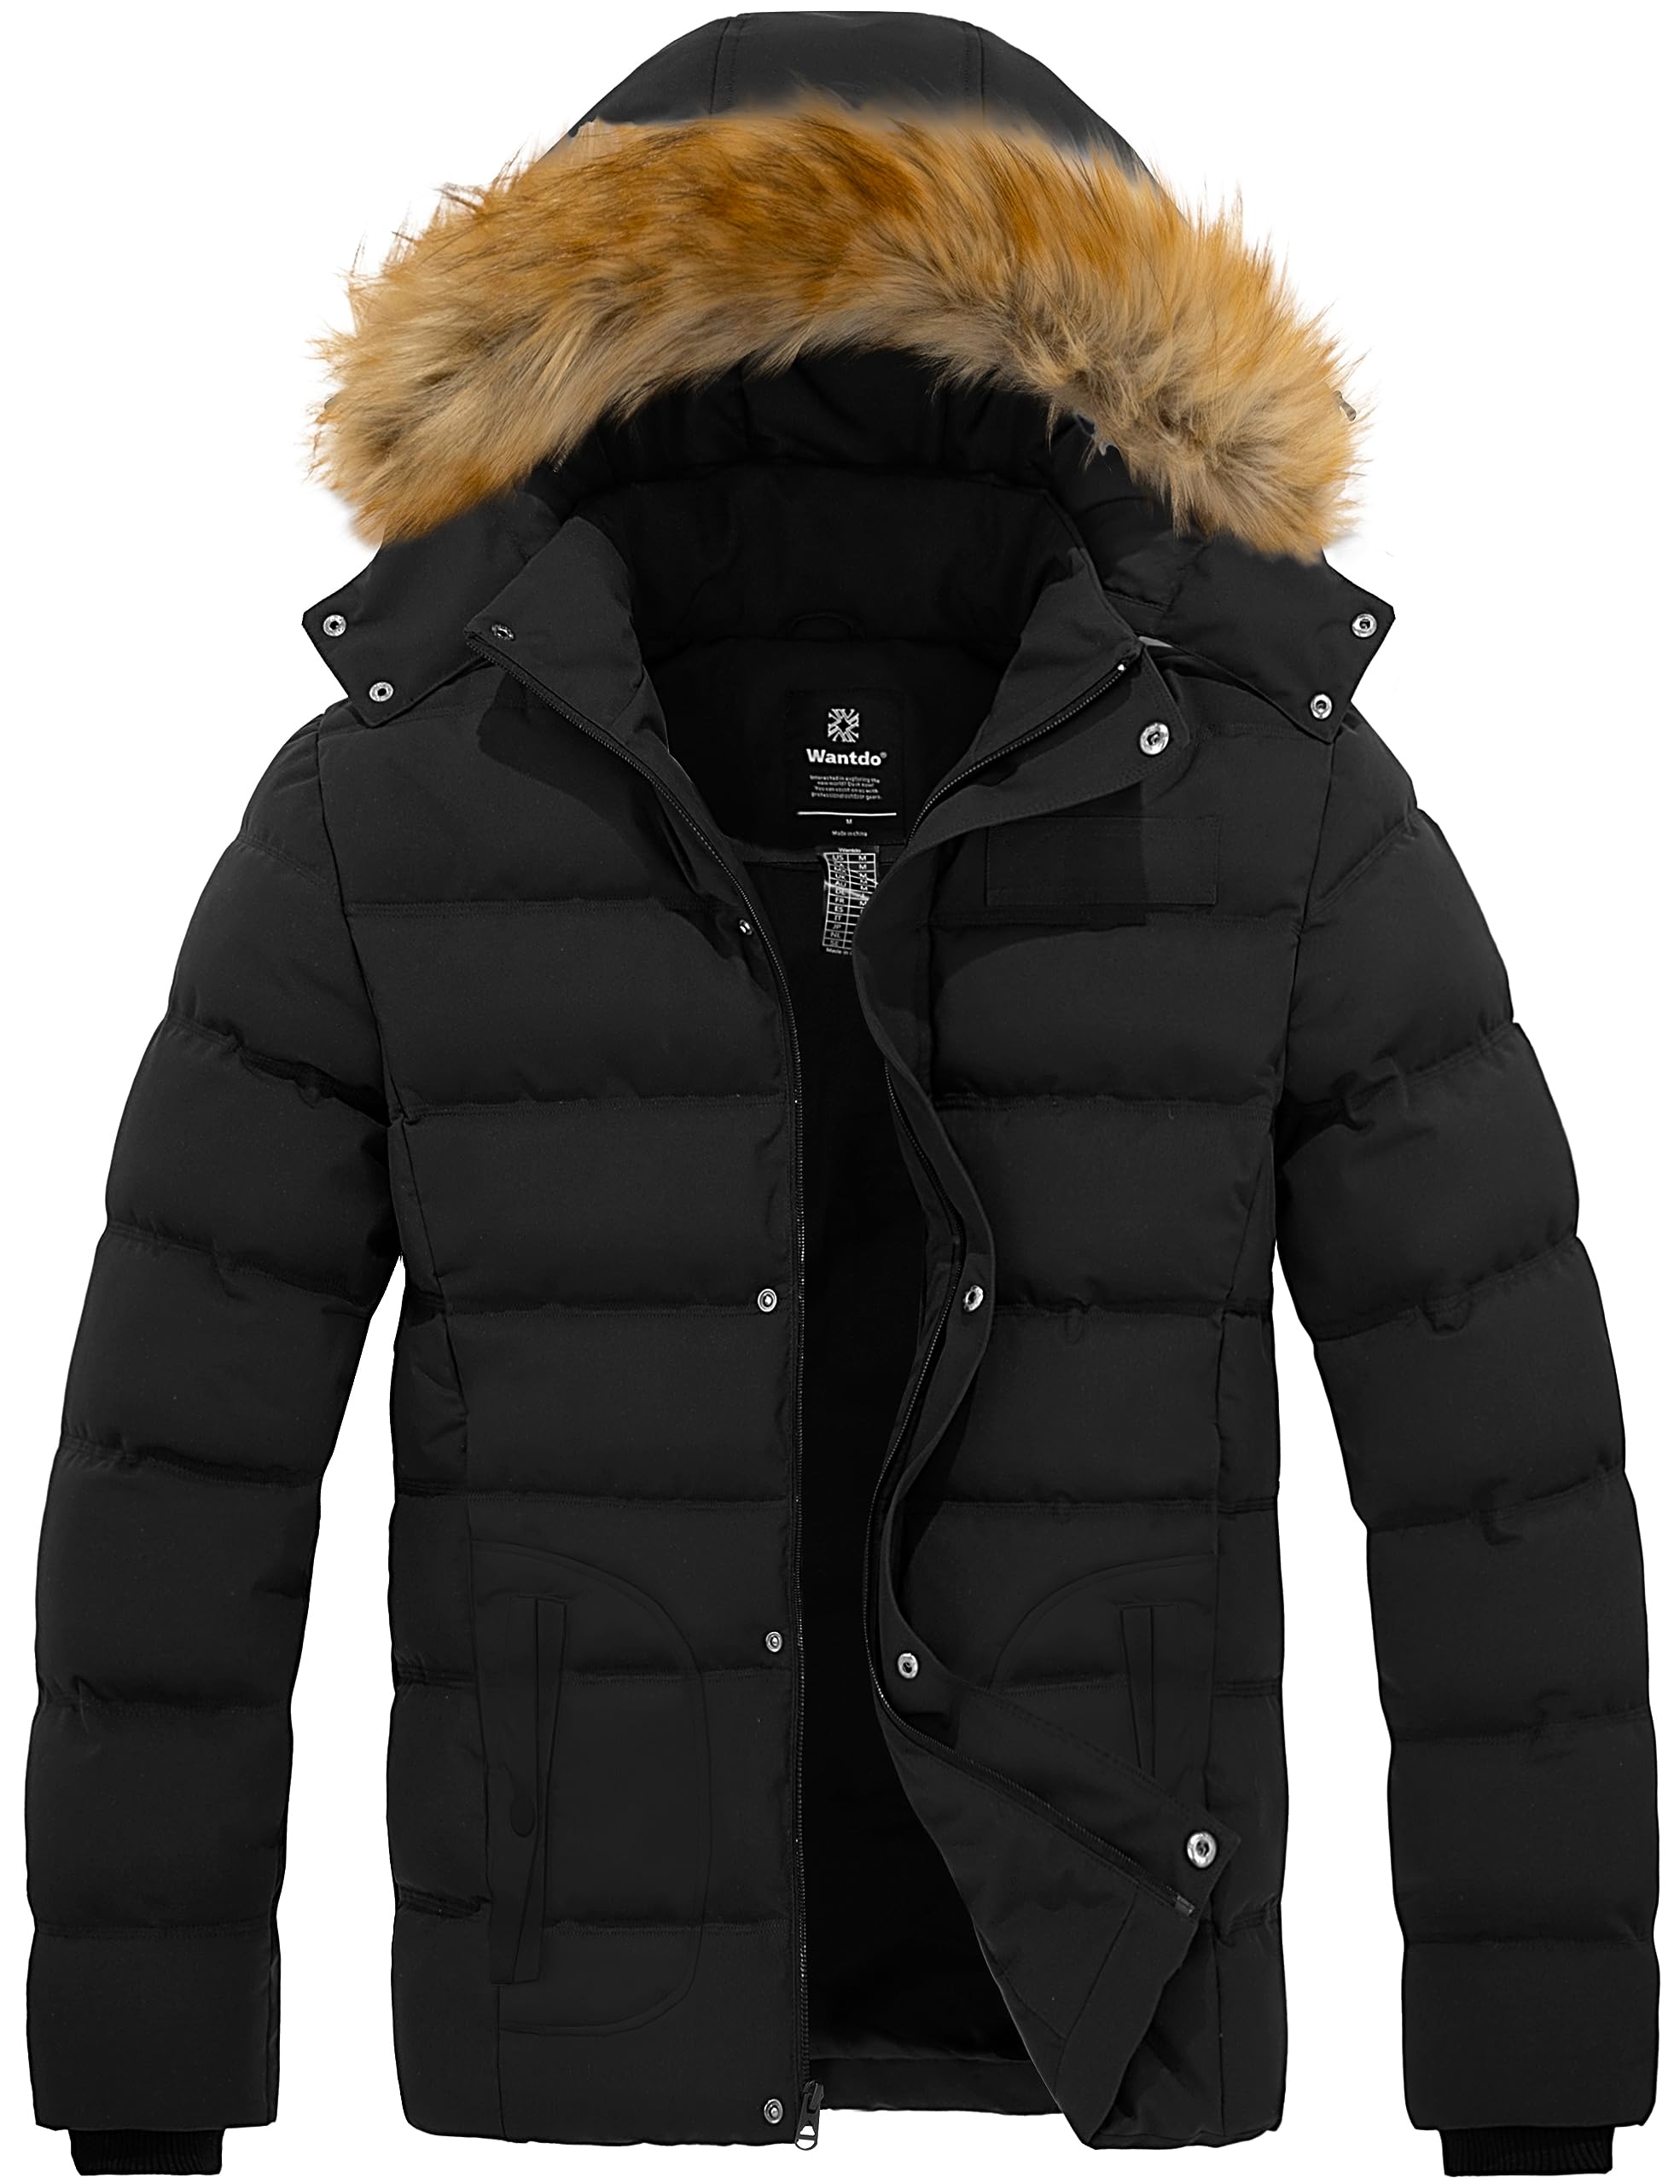 Men's puffer jacket with hood, when it comes to styling a men's puffer jacket with a hood, there are various options to consider